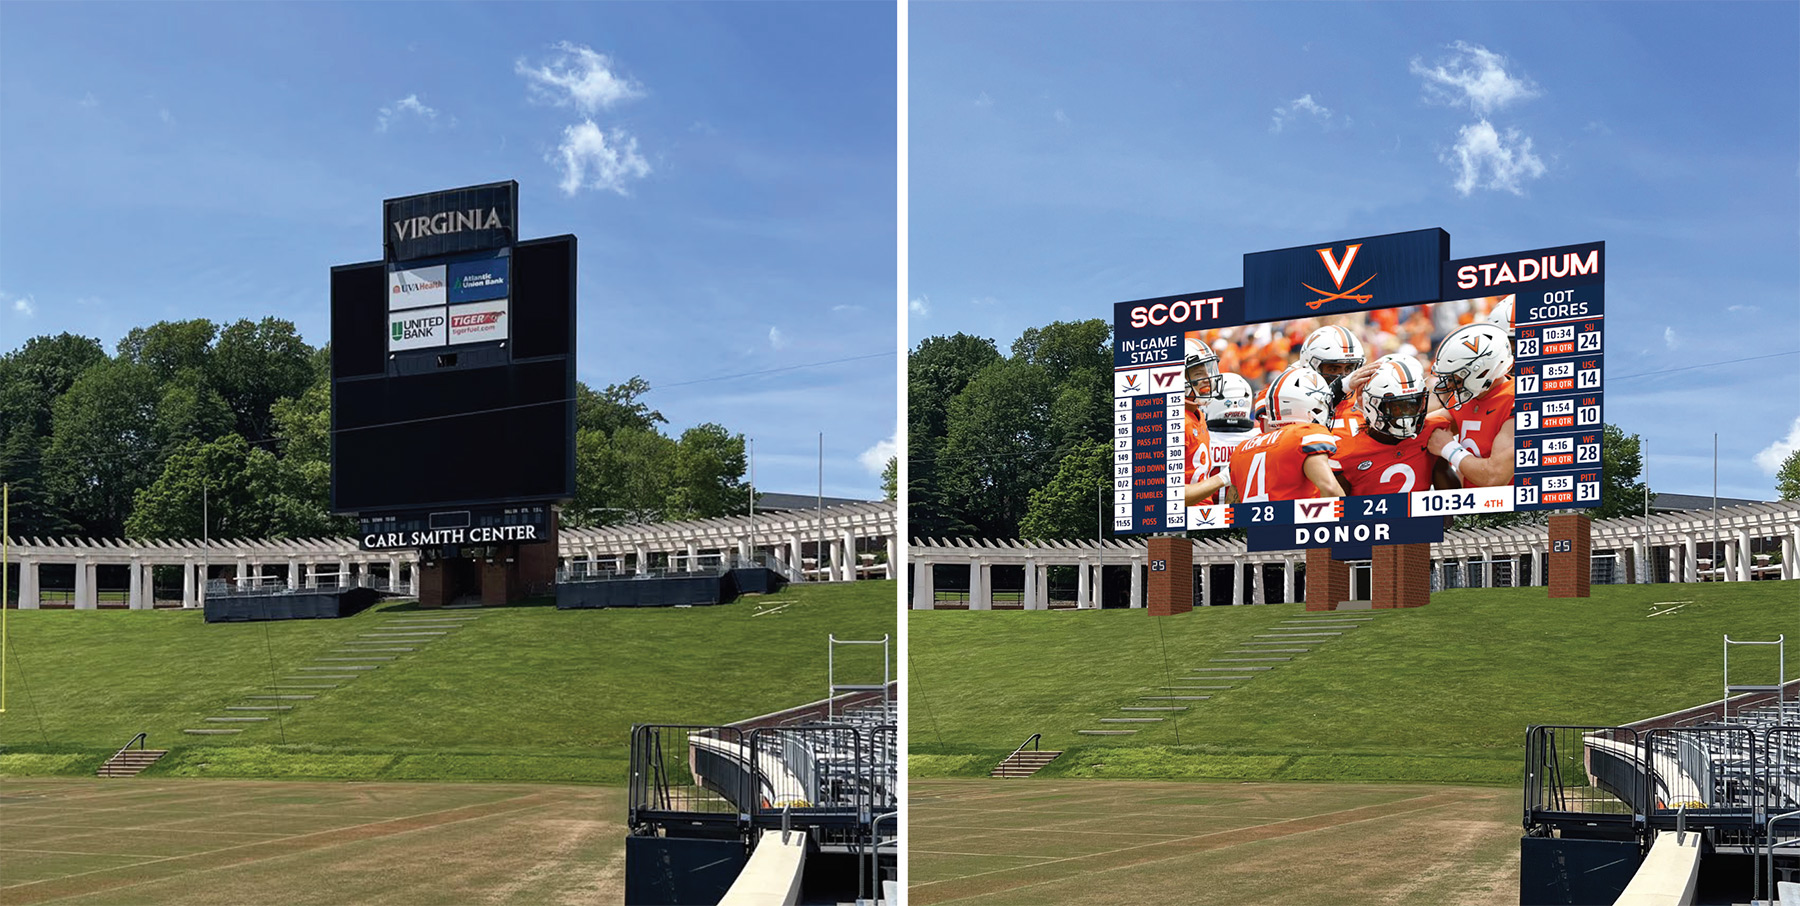 Side-by-side comparison of the current Scott Stadium scoreboard and an architectural rendering of an improved scoreboard. The new board is larger, with a wider screen and more space for stats readouts.